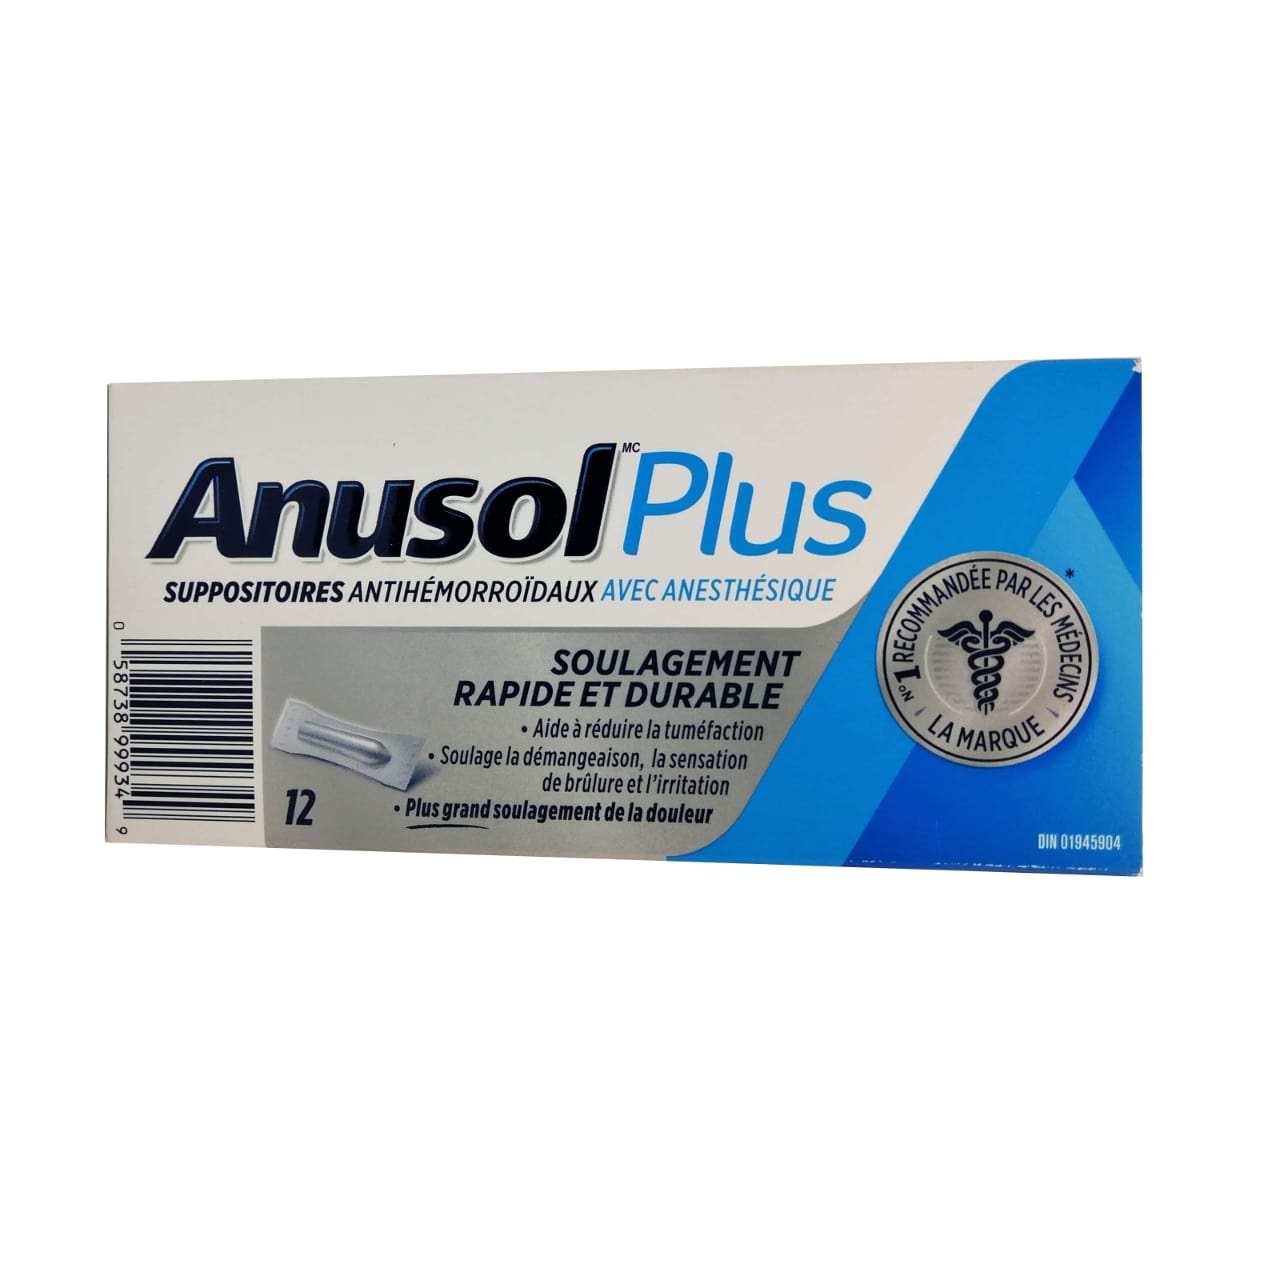 Product package for Anusol Plus Hemorrhoidal Suppositories with Anesthetic 12 pack in French